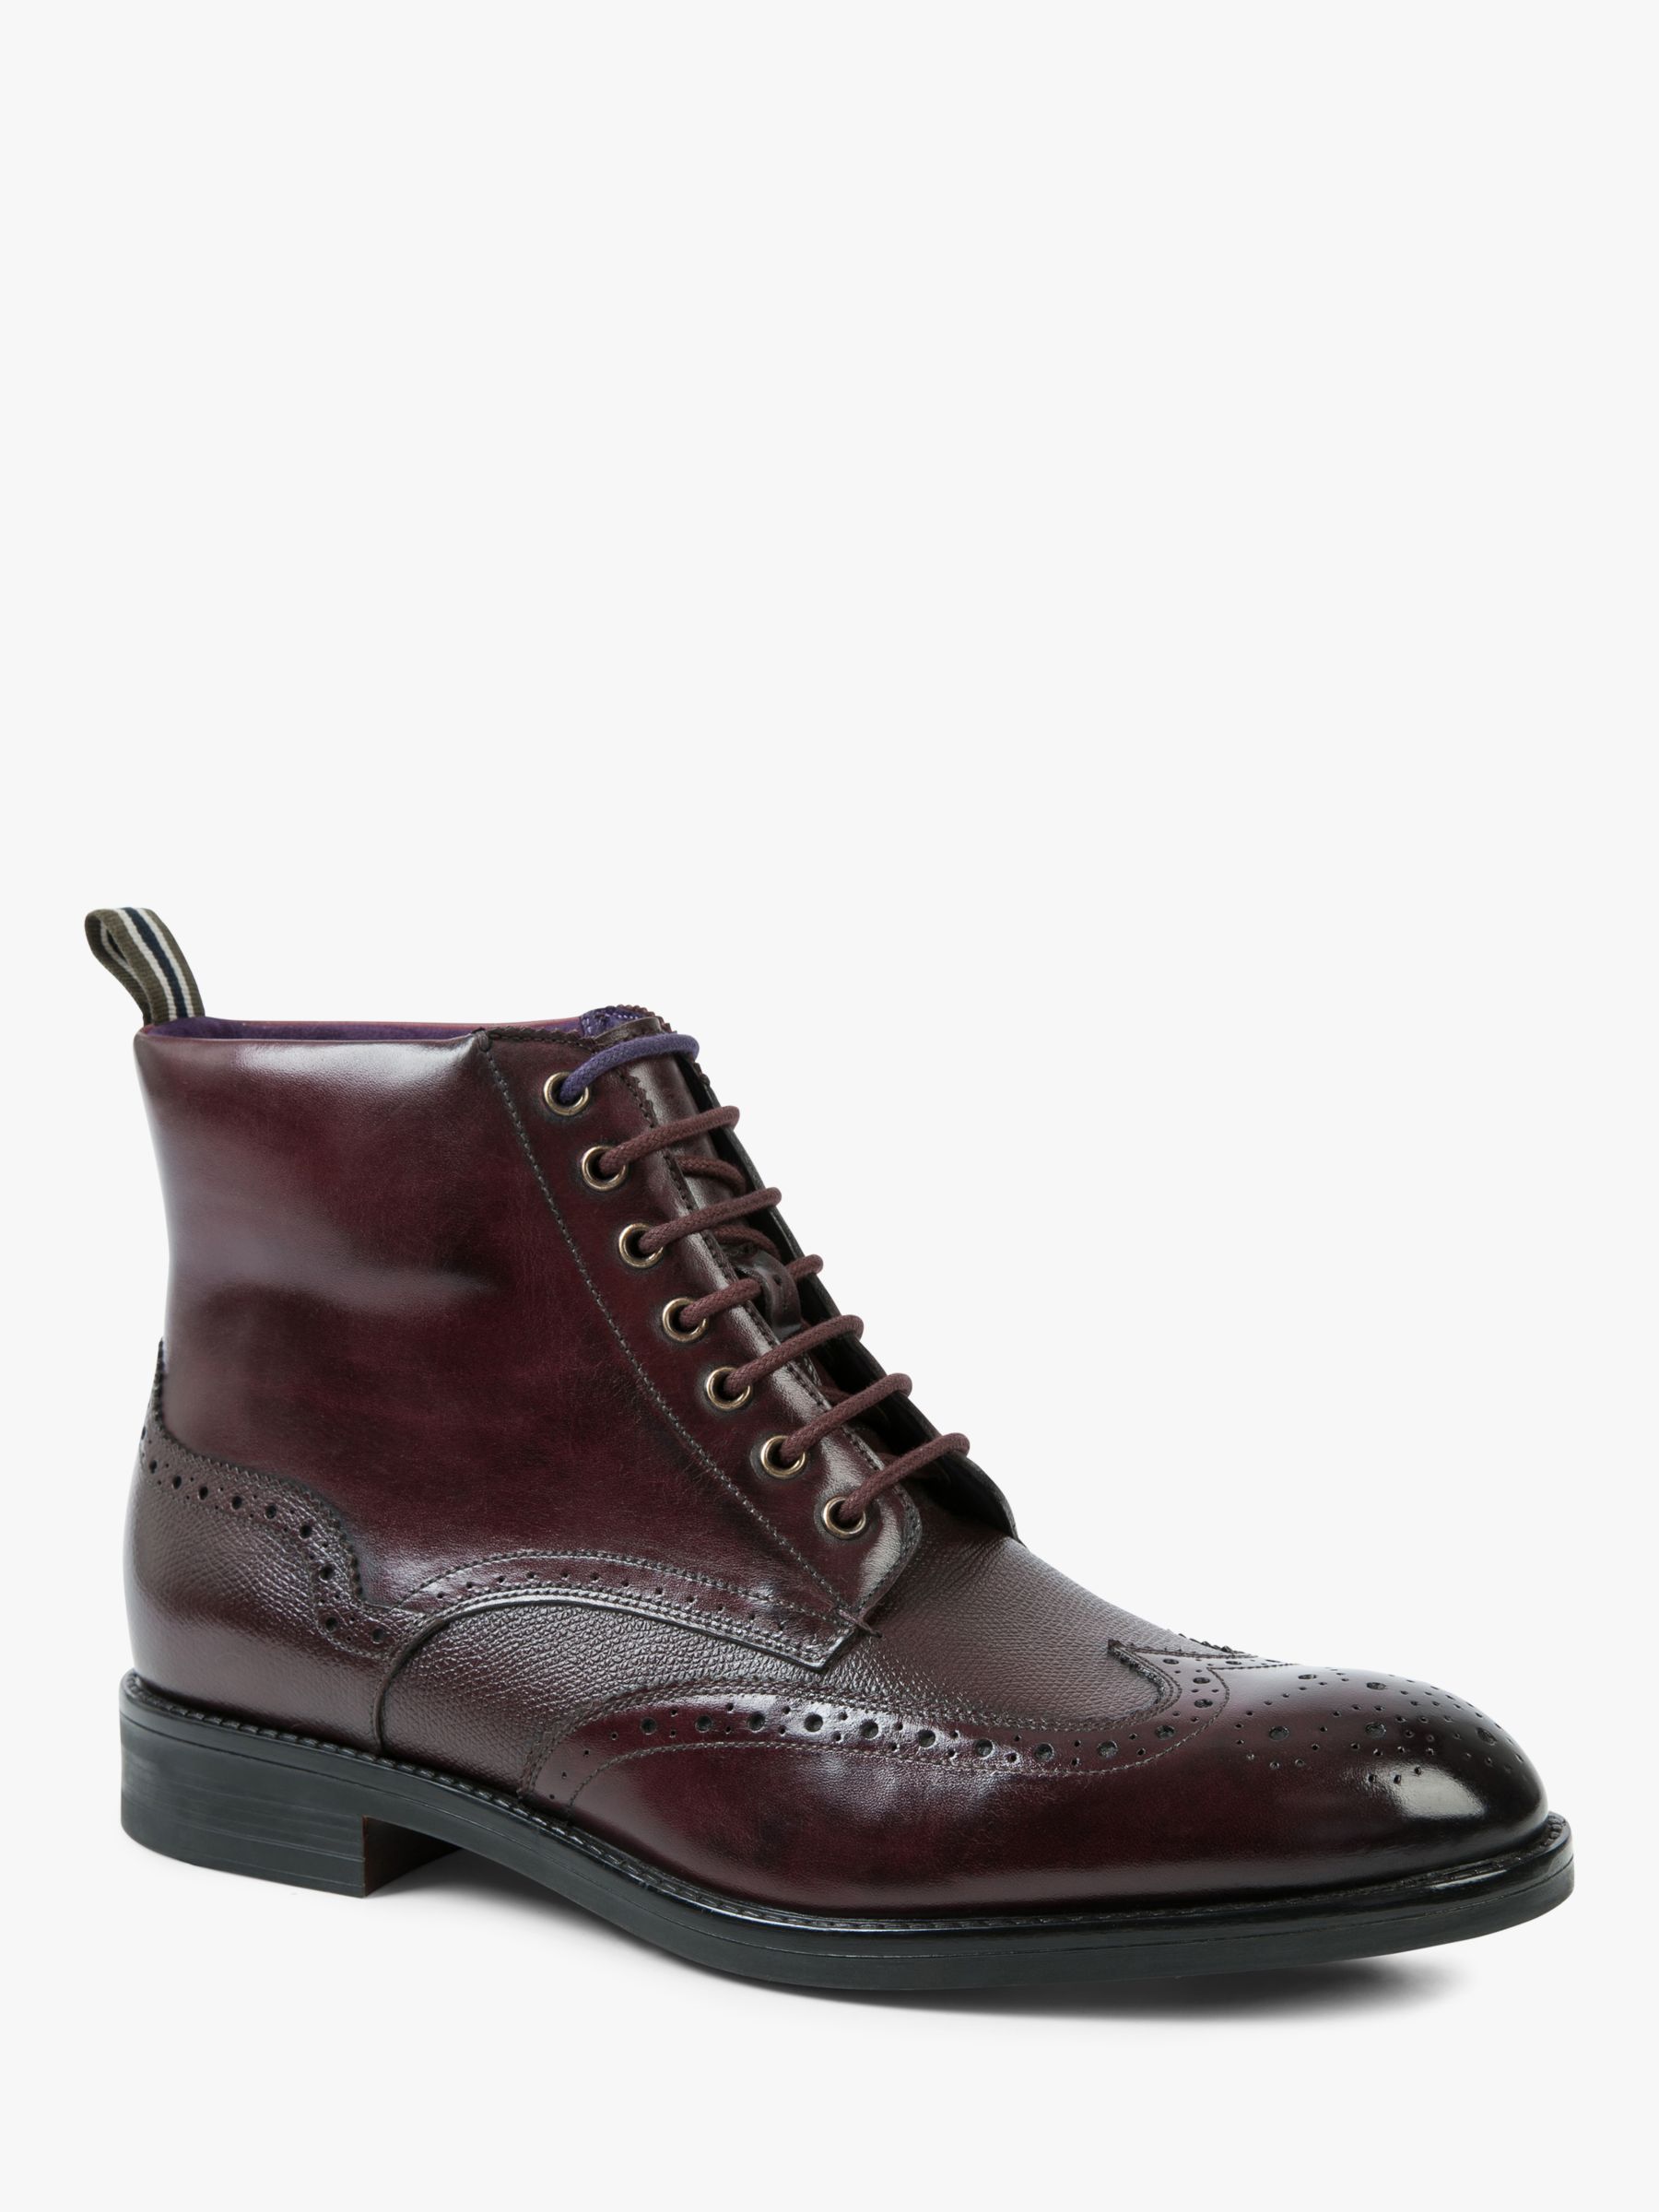 Ted Baker Twrens Brogue Boots, Dark Red